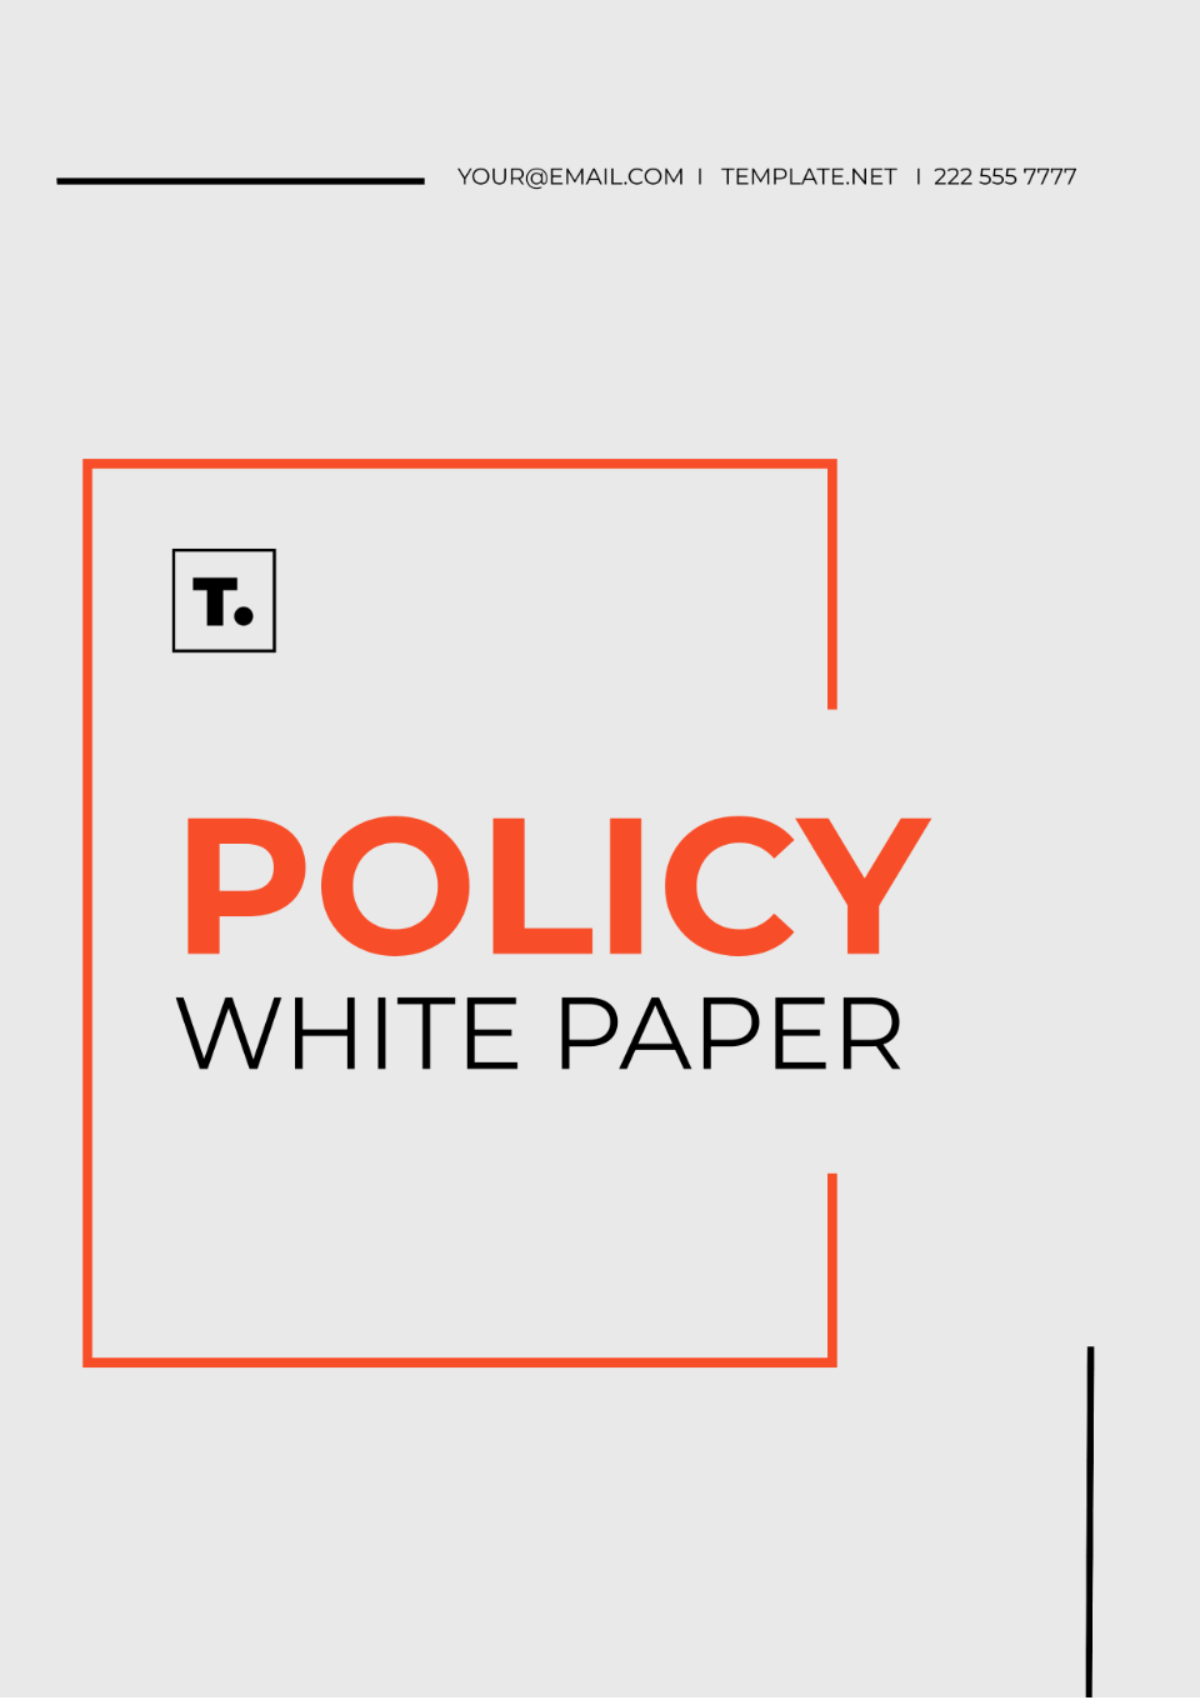 Policy White Paper Template